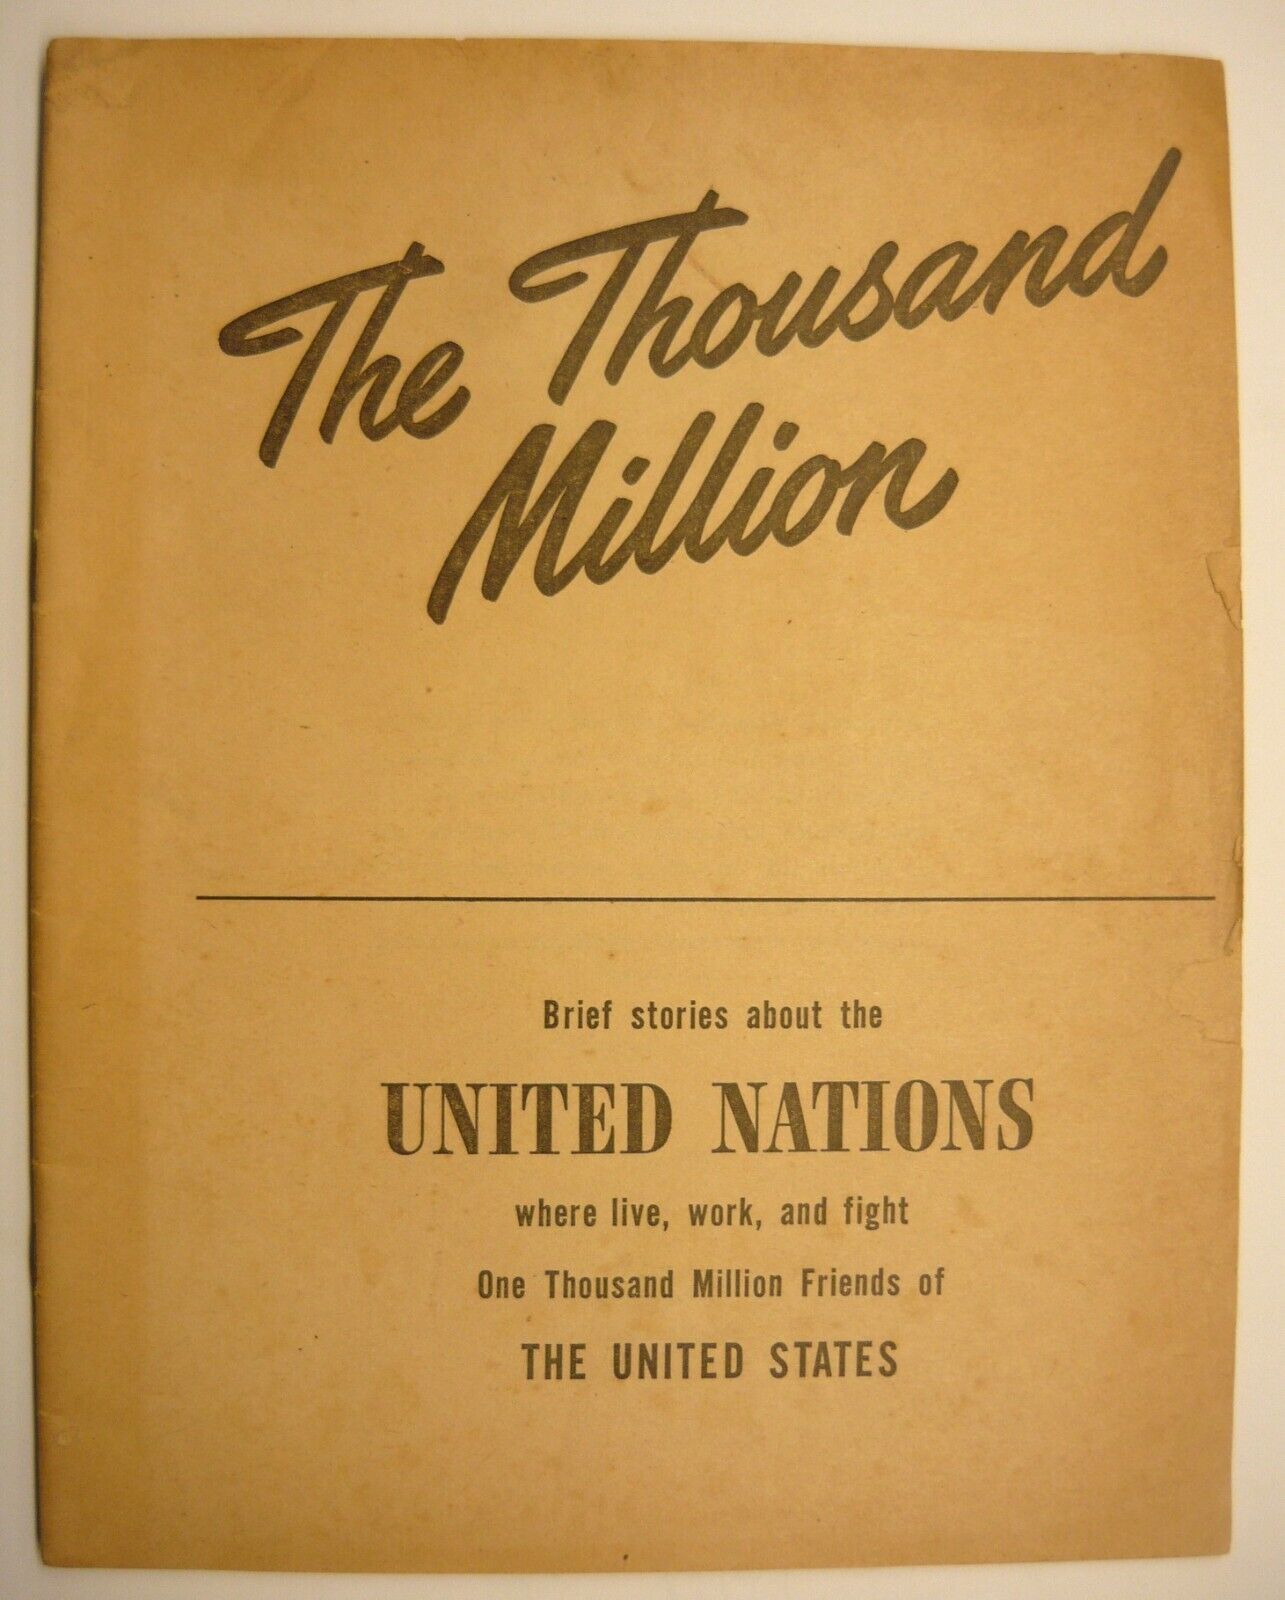 The Thousand Million, 1942, United Nations Publication, 46 Pages, 8 3/8 x 10 3/4